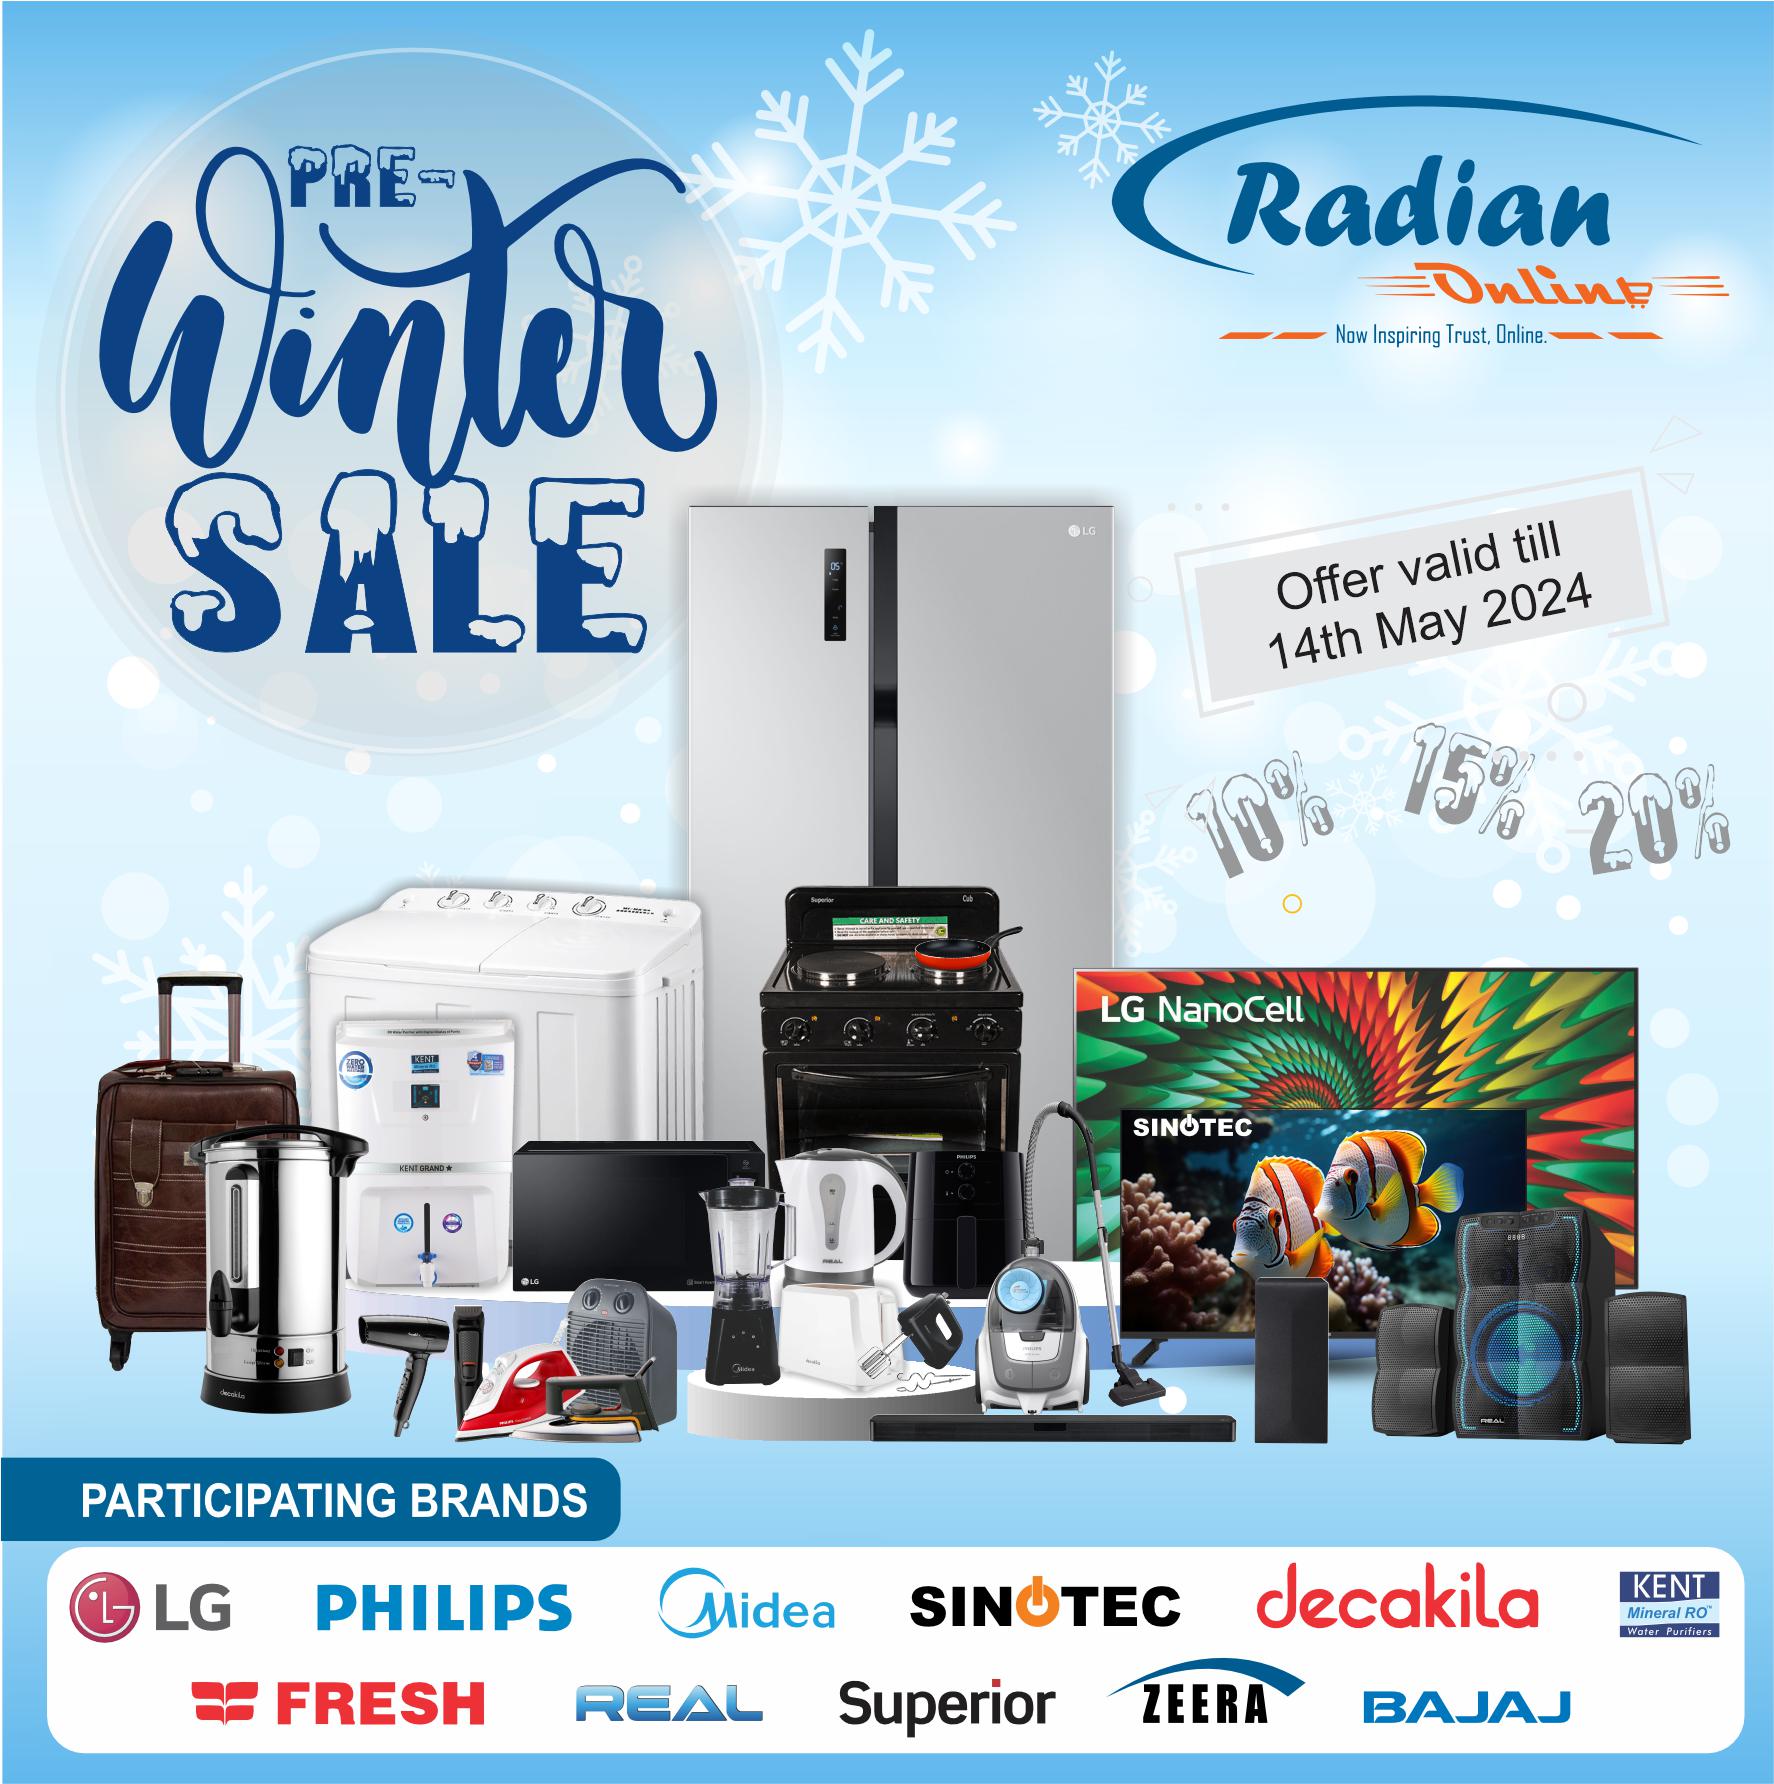 Shop from our Pre-Winter Sale on LG, Philips, Midea and more